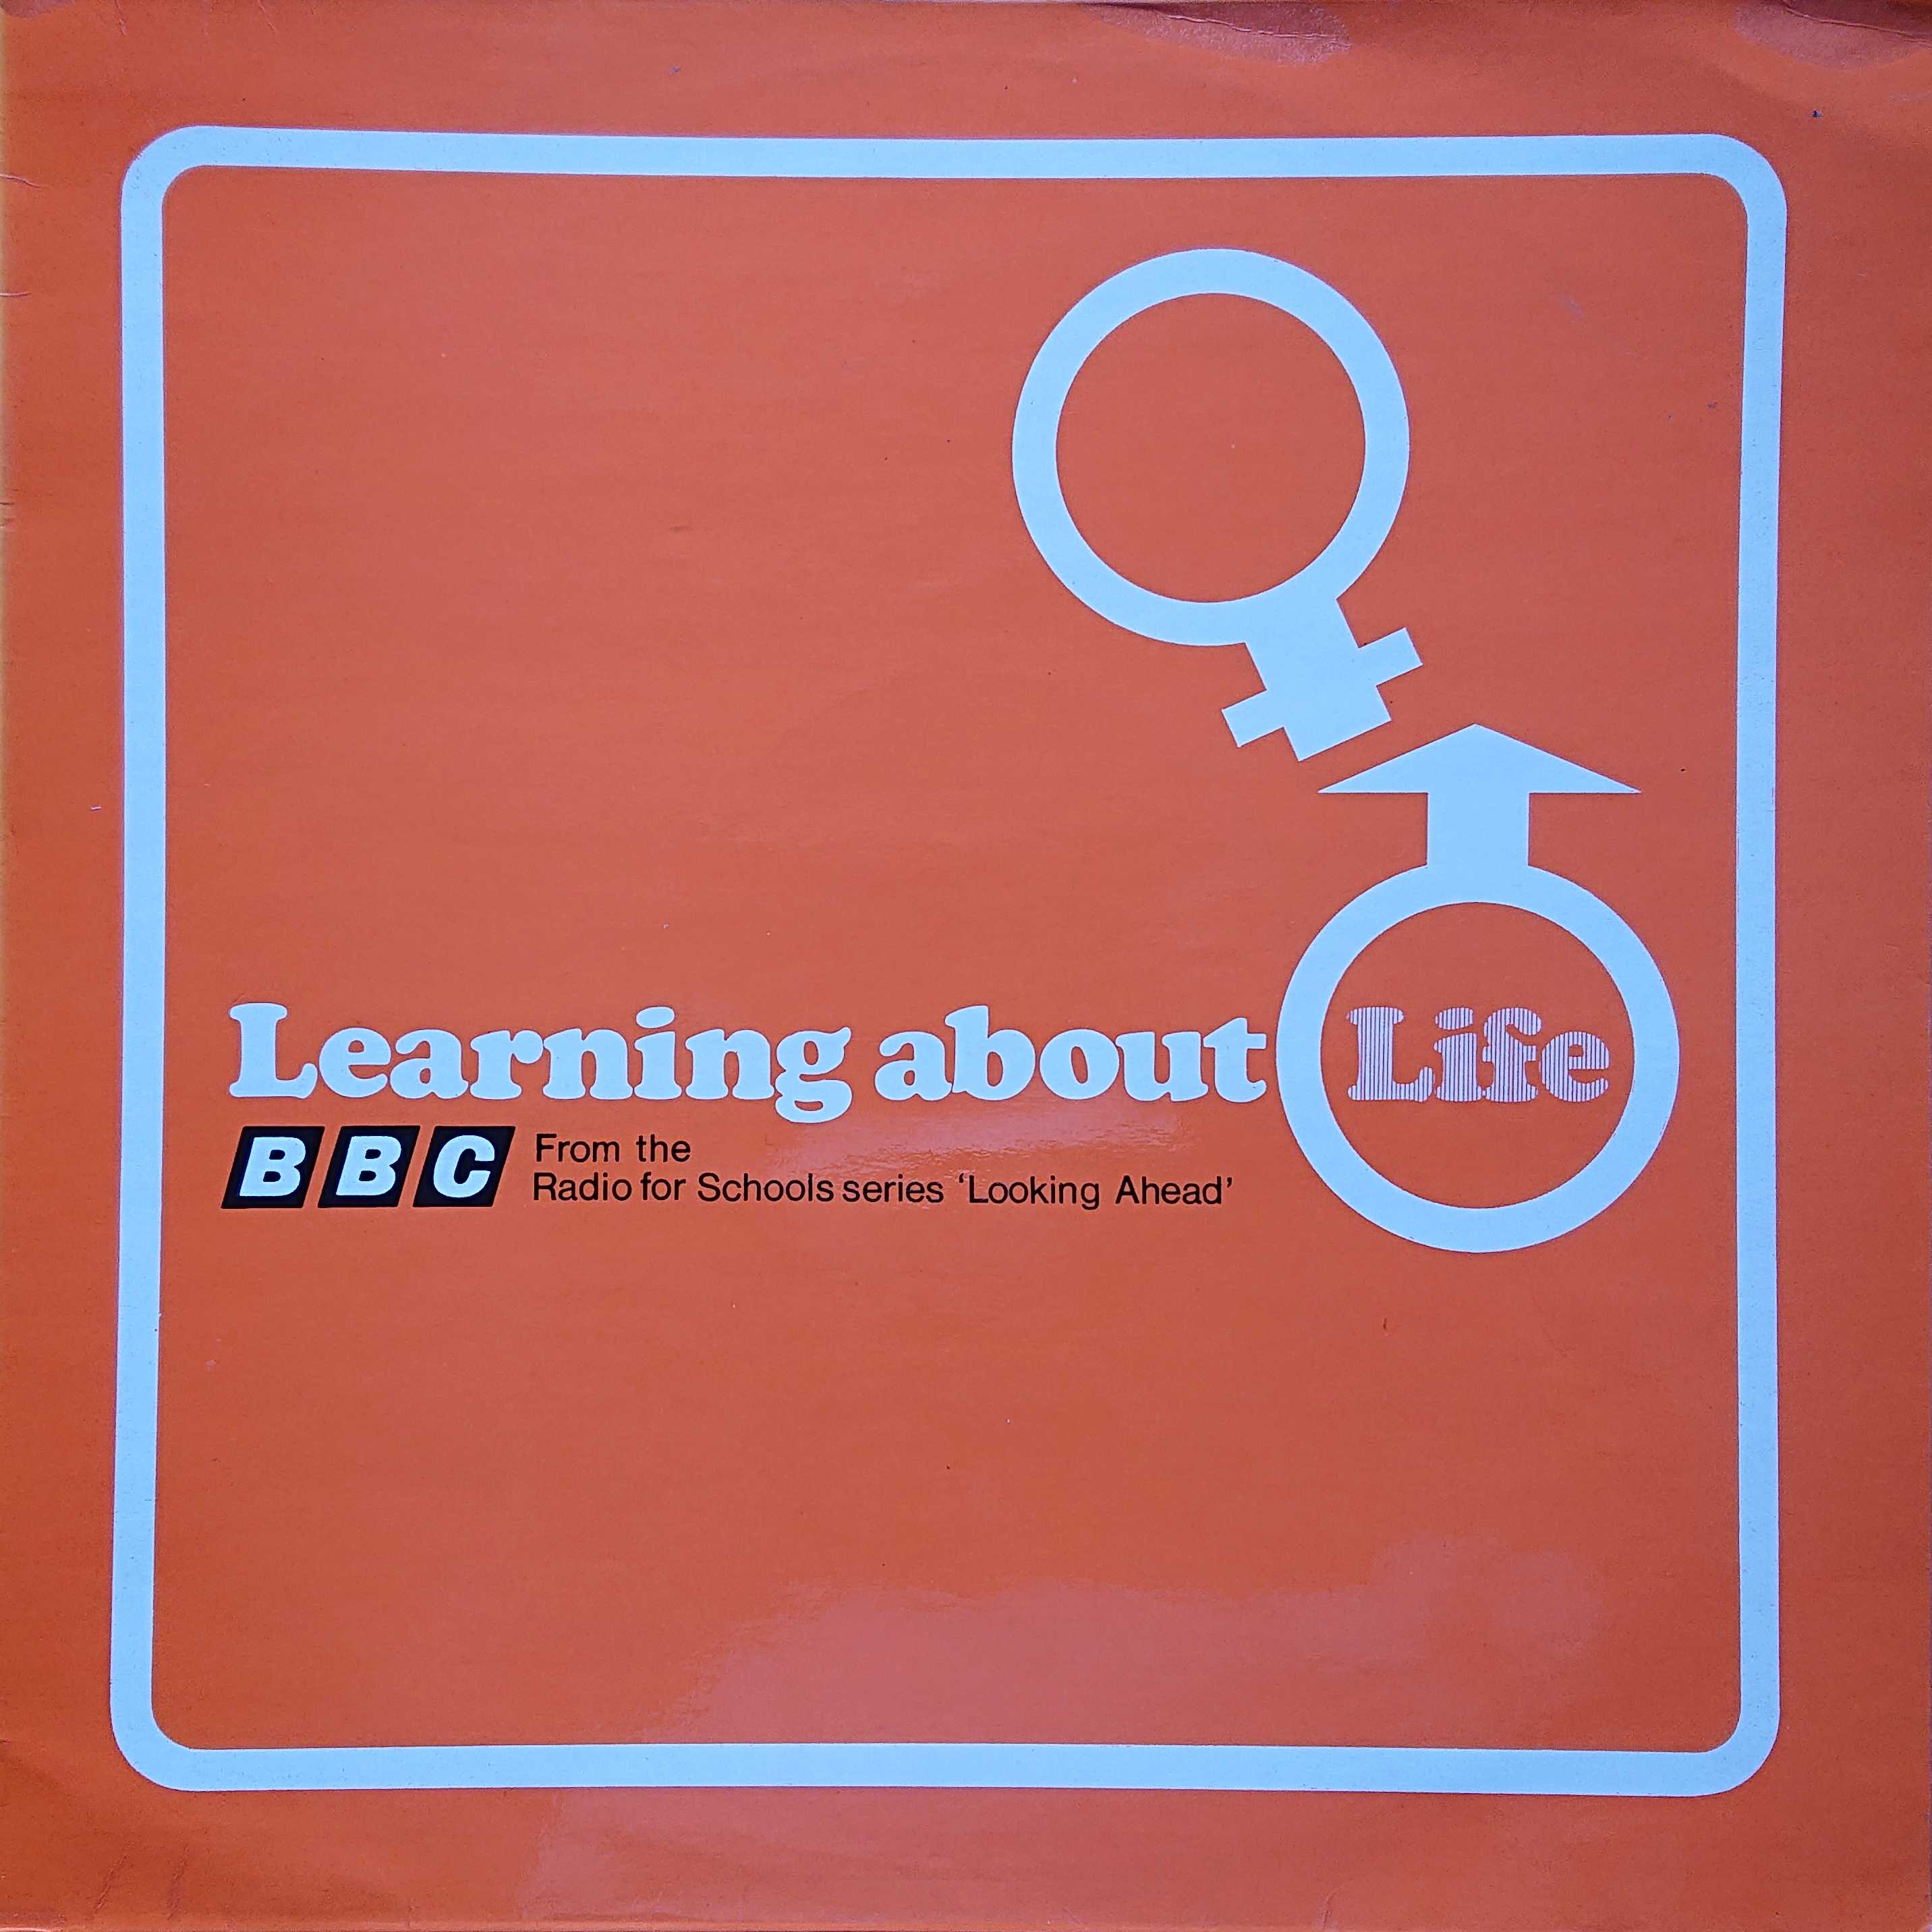 Picture of RESR 6 Learning about life by artist Michael Smee from the BBC albums - Records and Tapes library